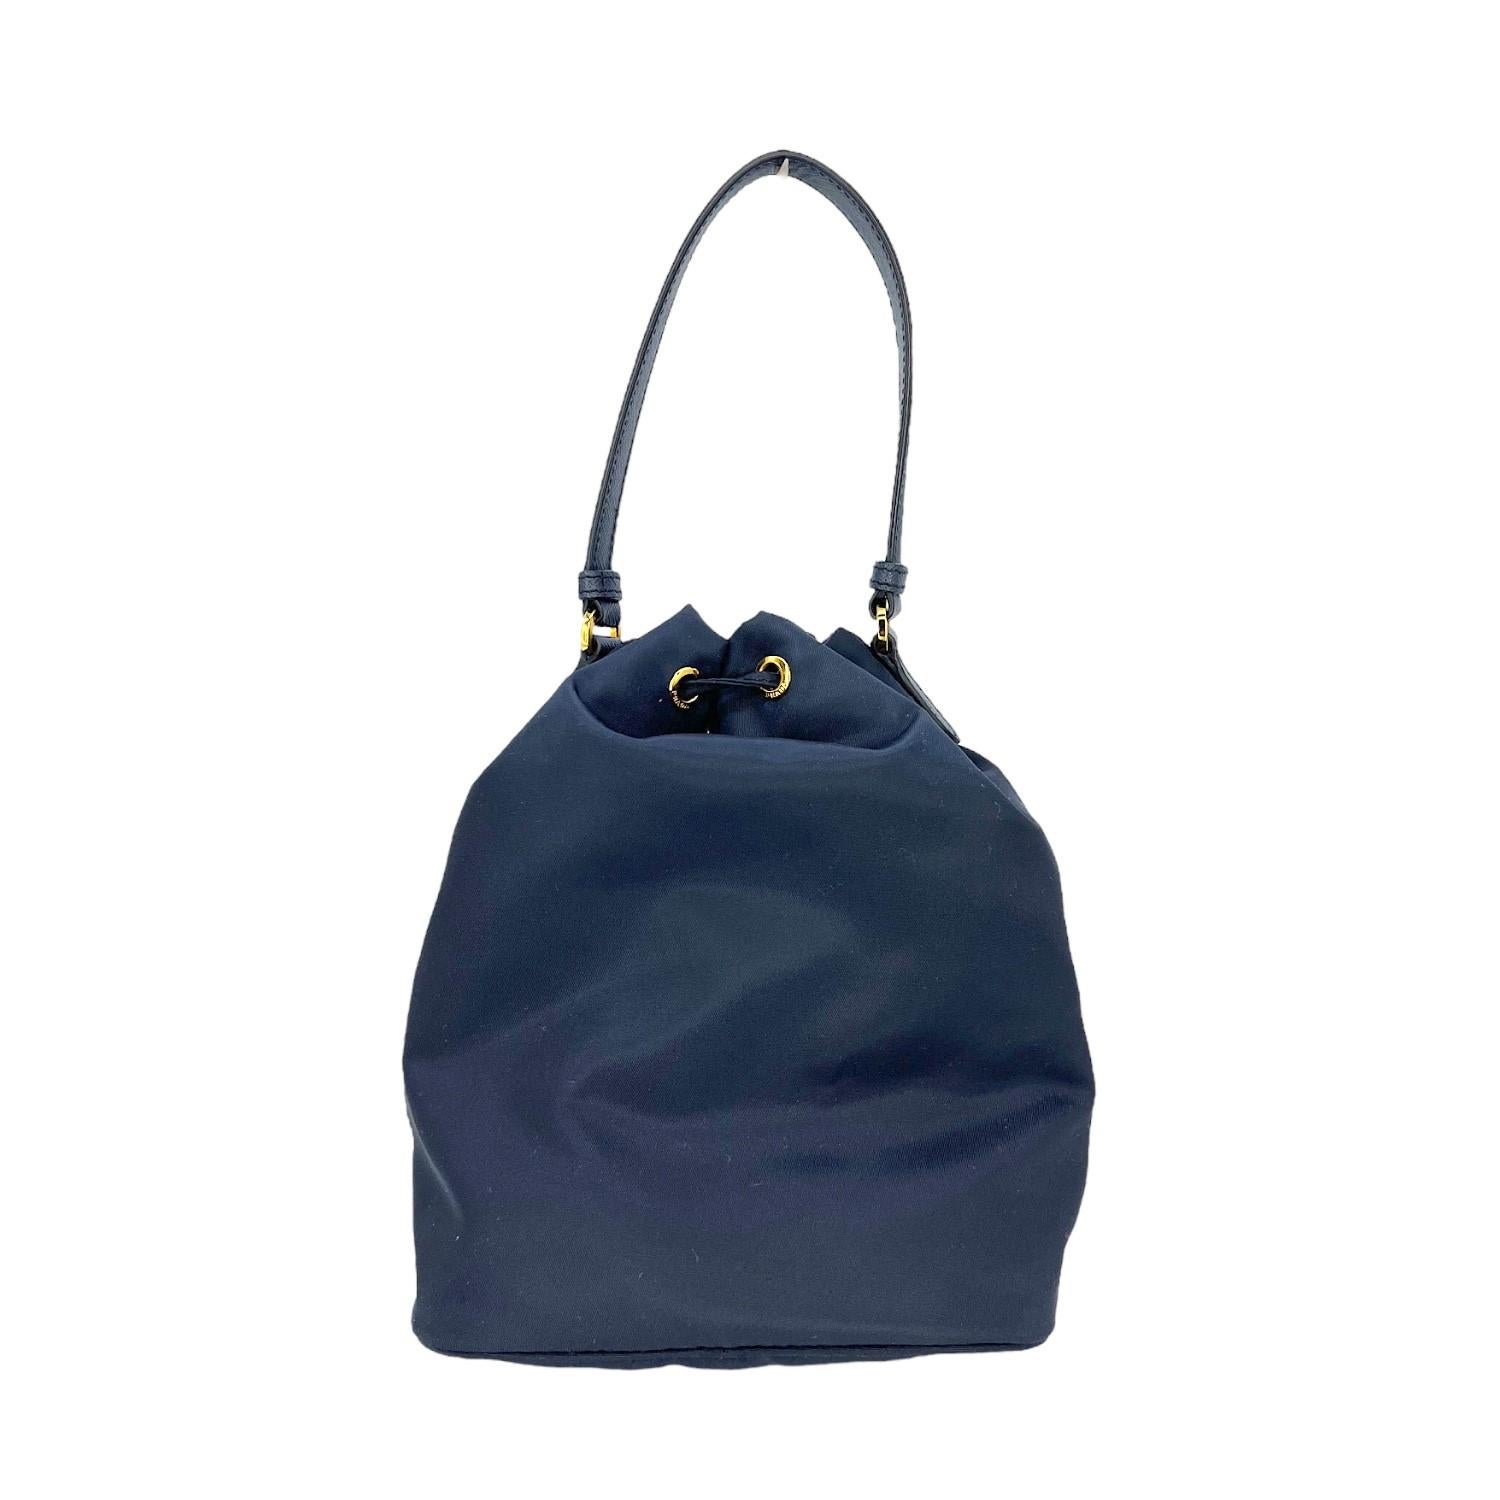 This Prada Re-Nylon Duet Bag was made in Italy and it is finely crafted in blue Re-Nylon exterior with gold-tone hardware features. It has a flat leather top handle. It comes with a removeable shoulder strap as well. It has a small frontal zipper